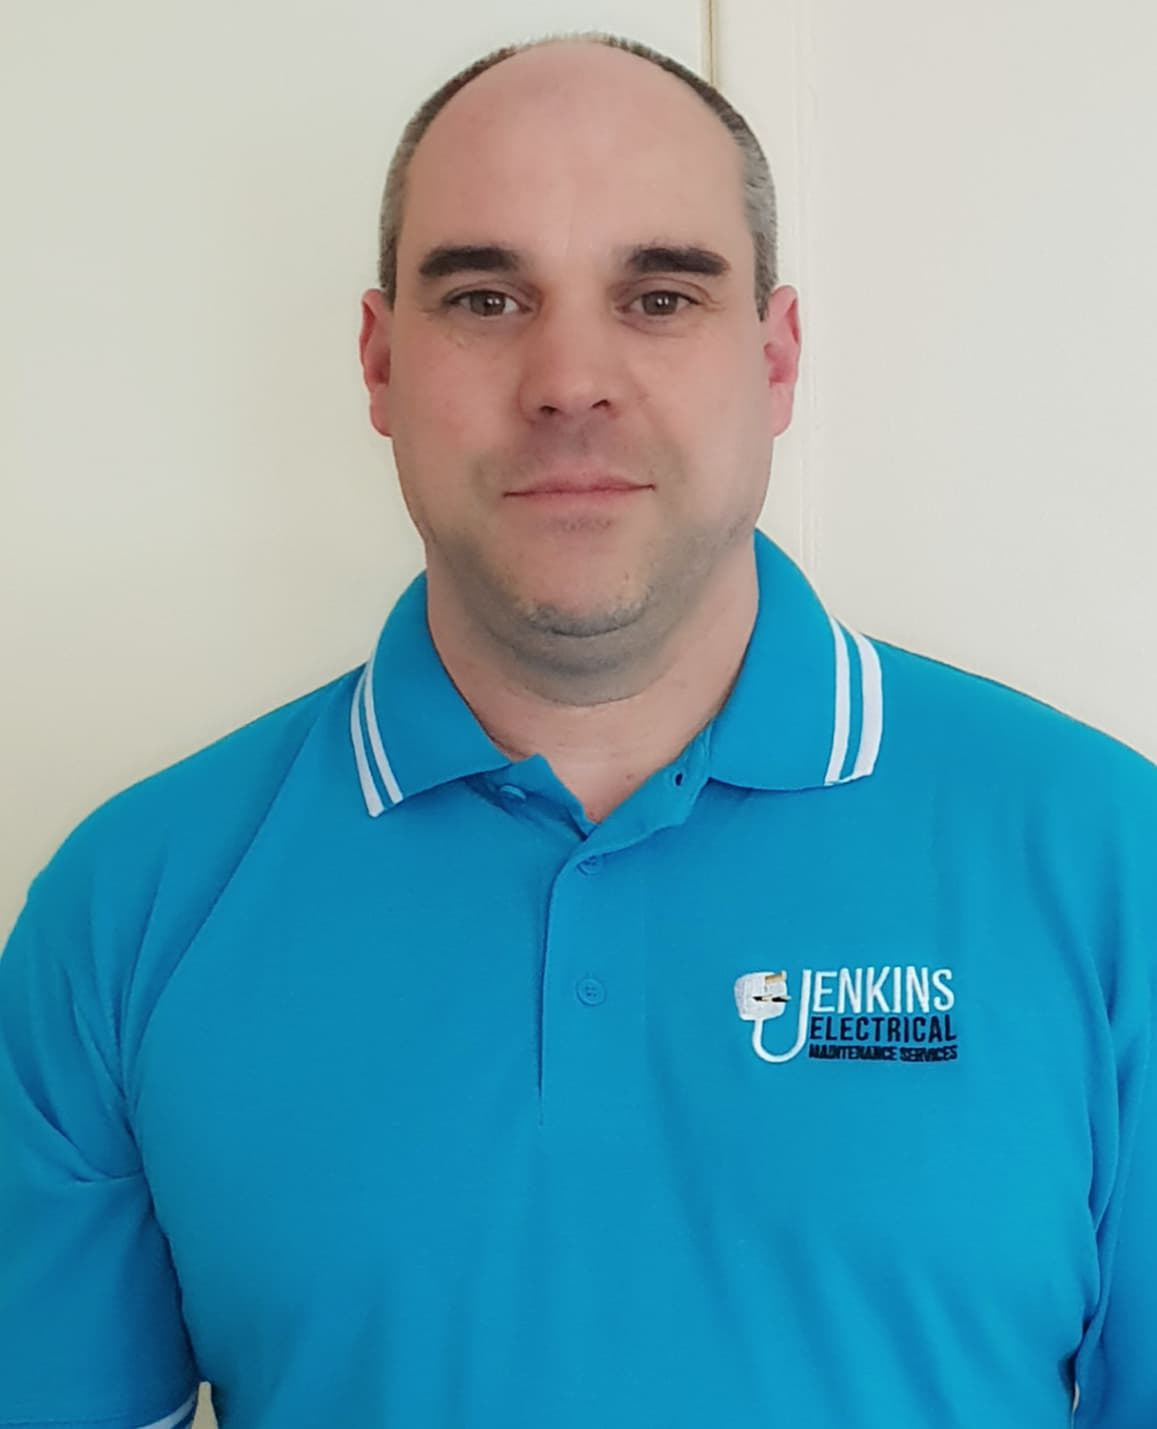 Neill Jenkins - Your Local, Reliable & Trustworthy Electrician in Southampton